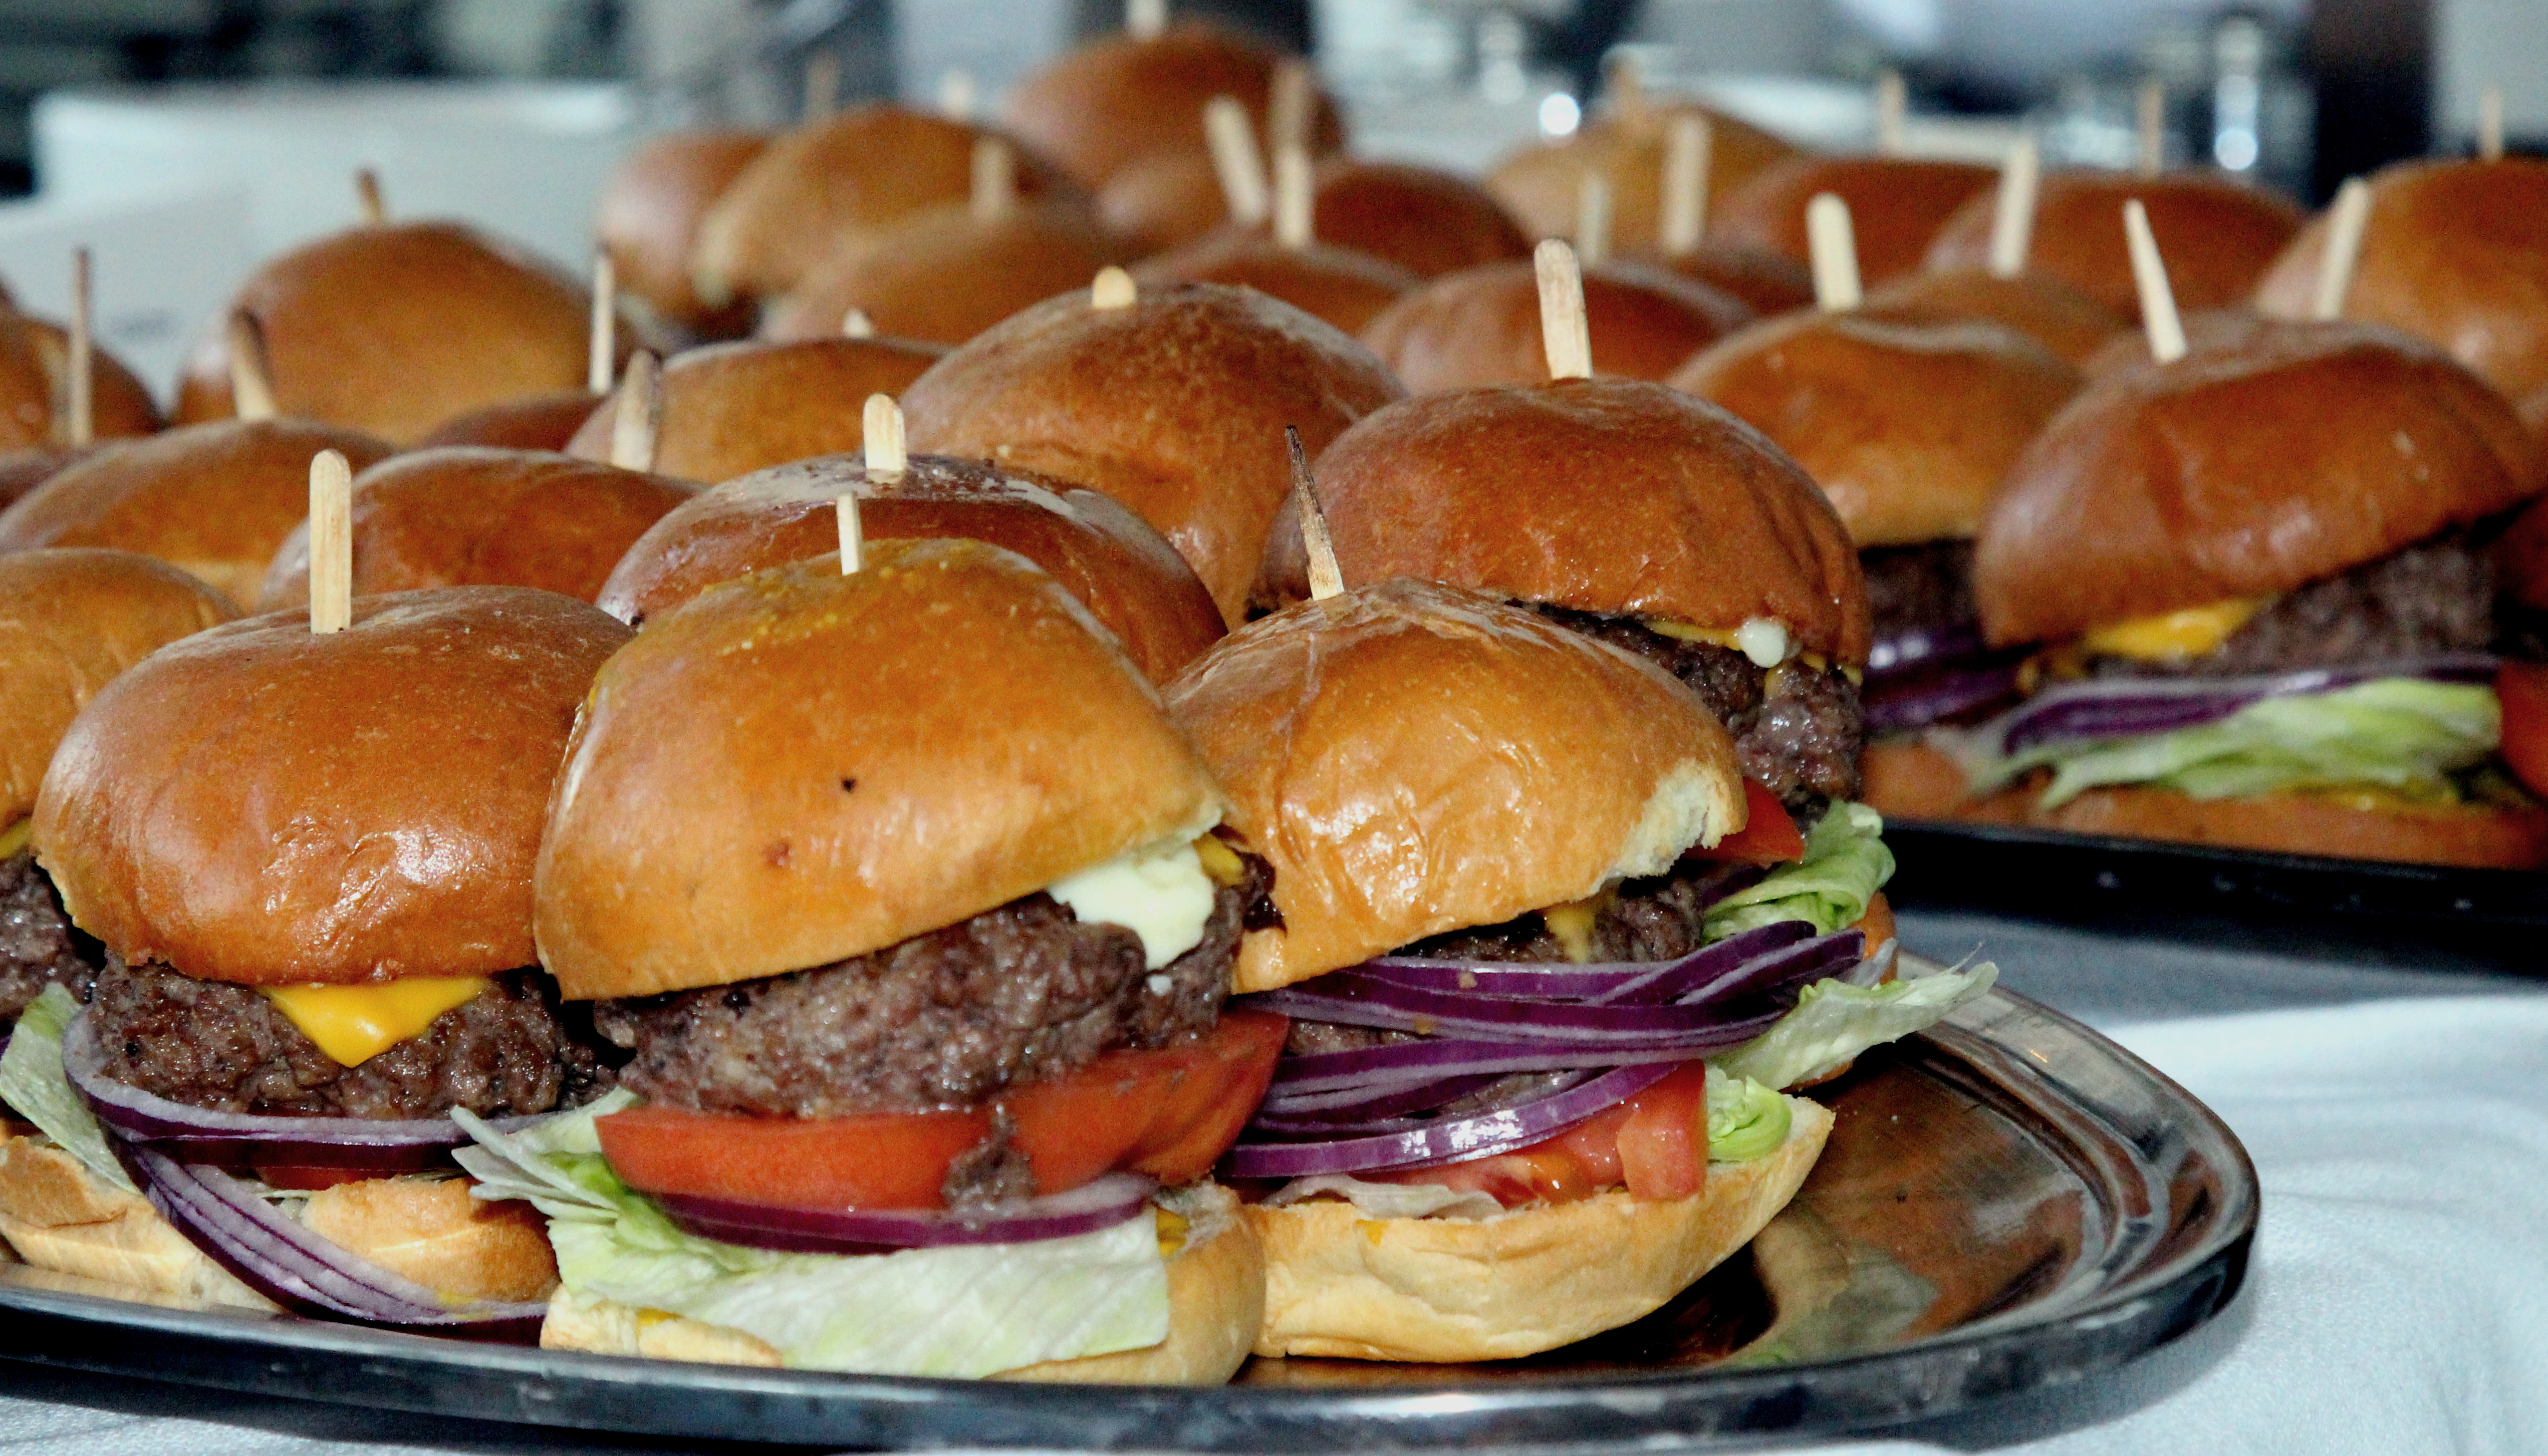 A_party_tray_of_sliders_at_a_restaurant